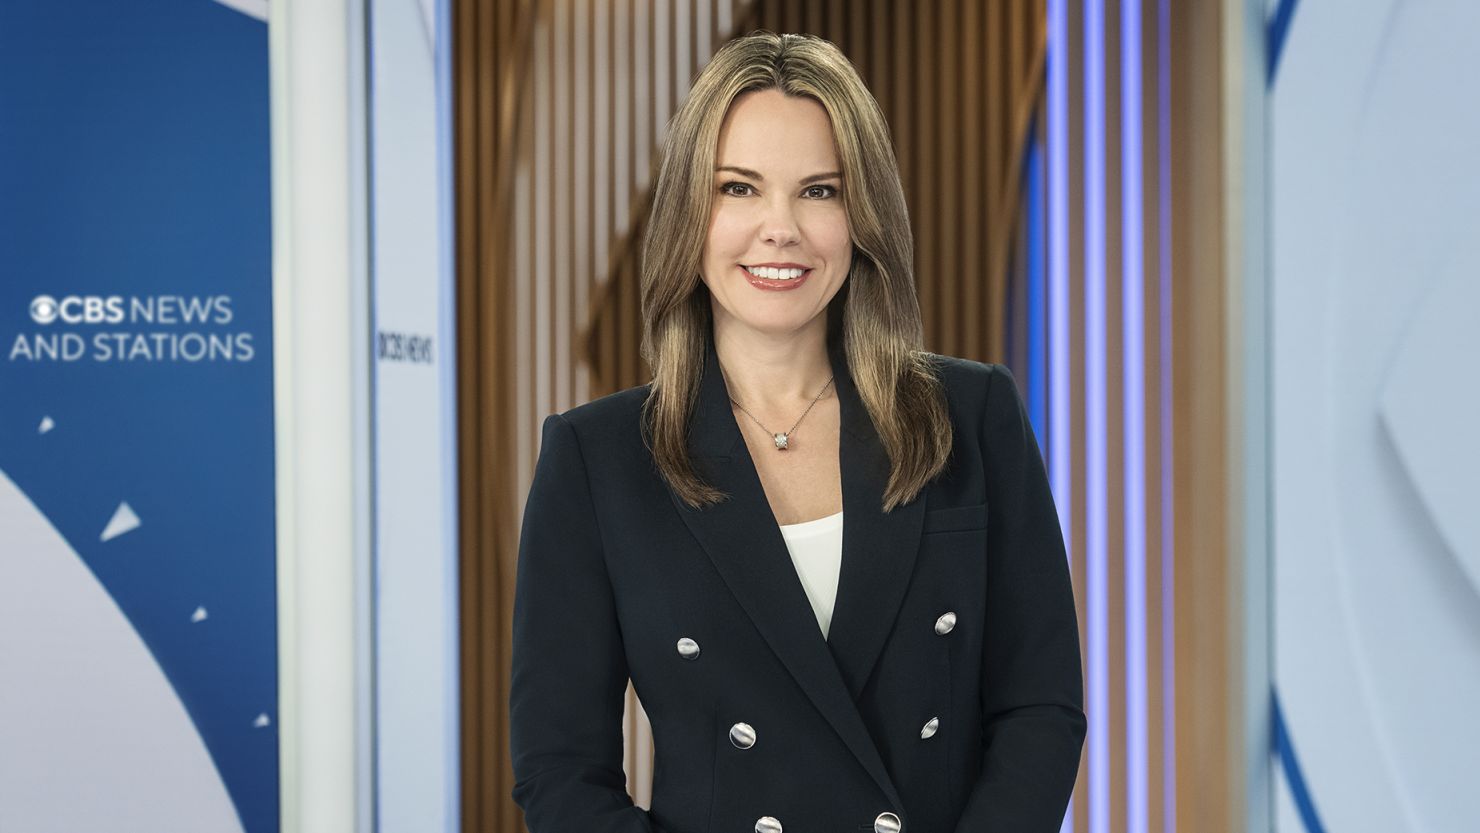 Wendy McMahon, President and Co-Head of CBS News and Stations, in March 2022.